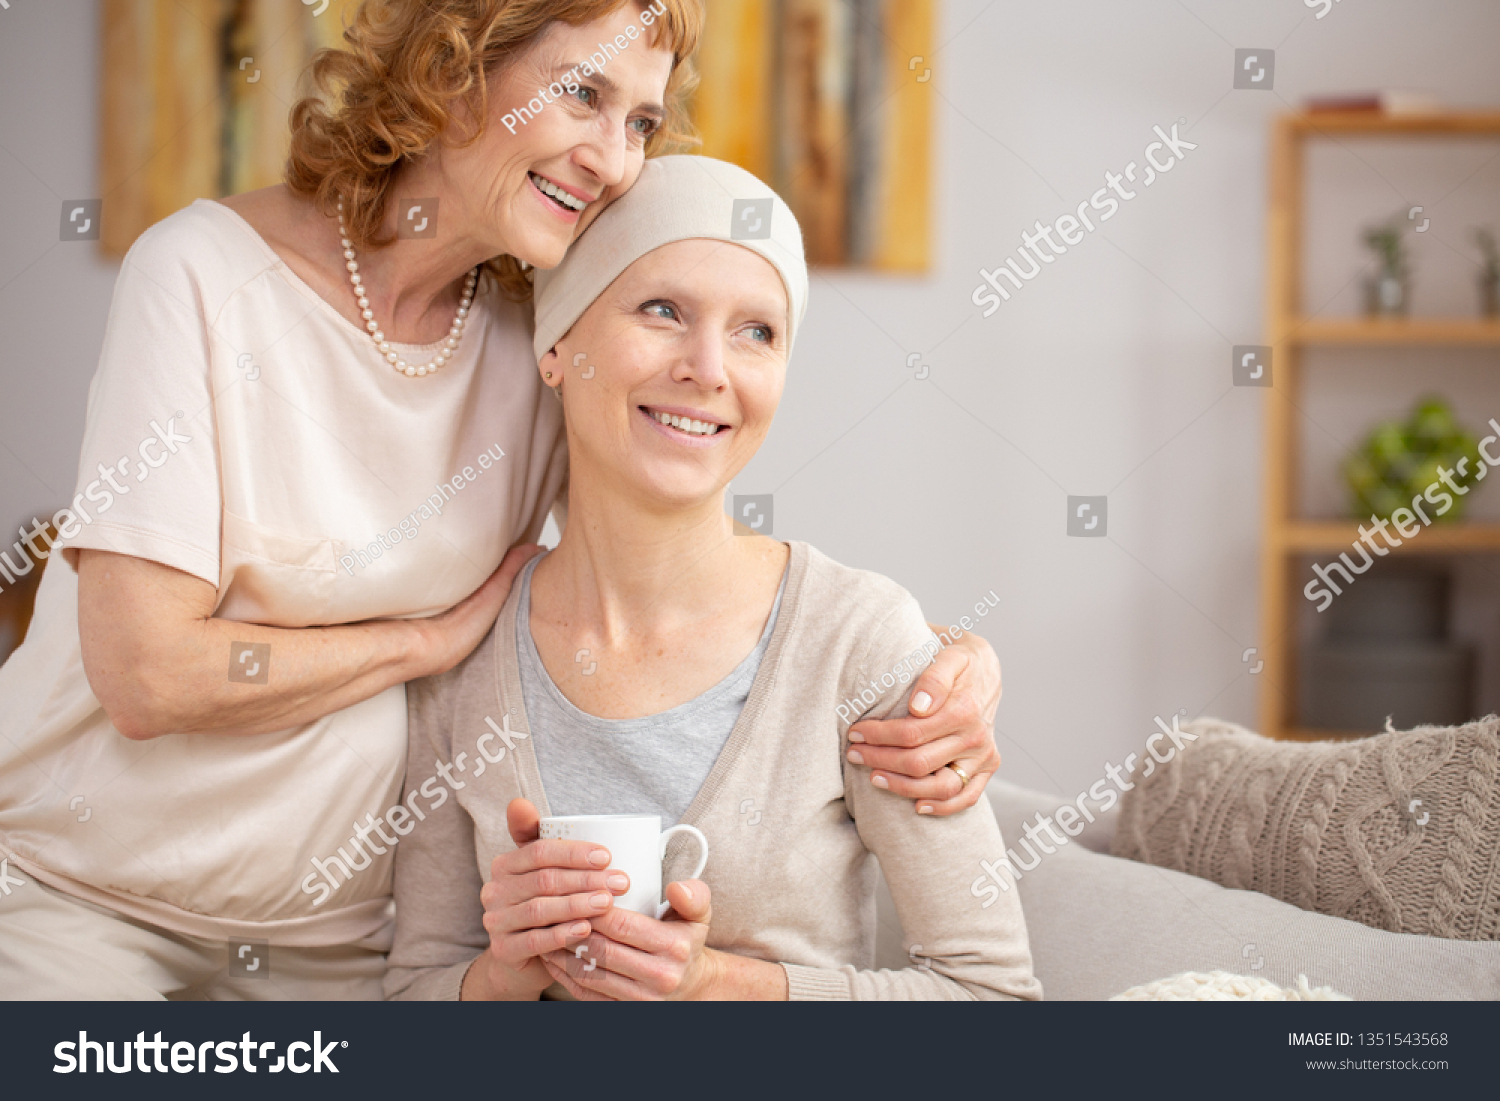 Senior woman suffering from lung cancer sitting at home with her sister enjoining their time after hospital treatment #1351543568